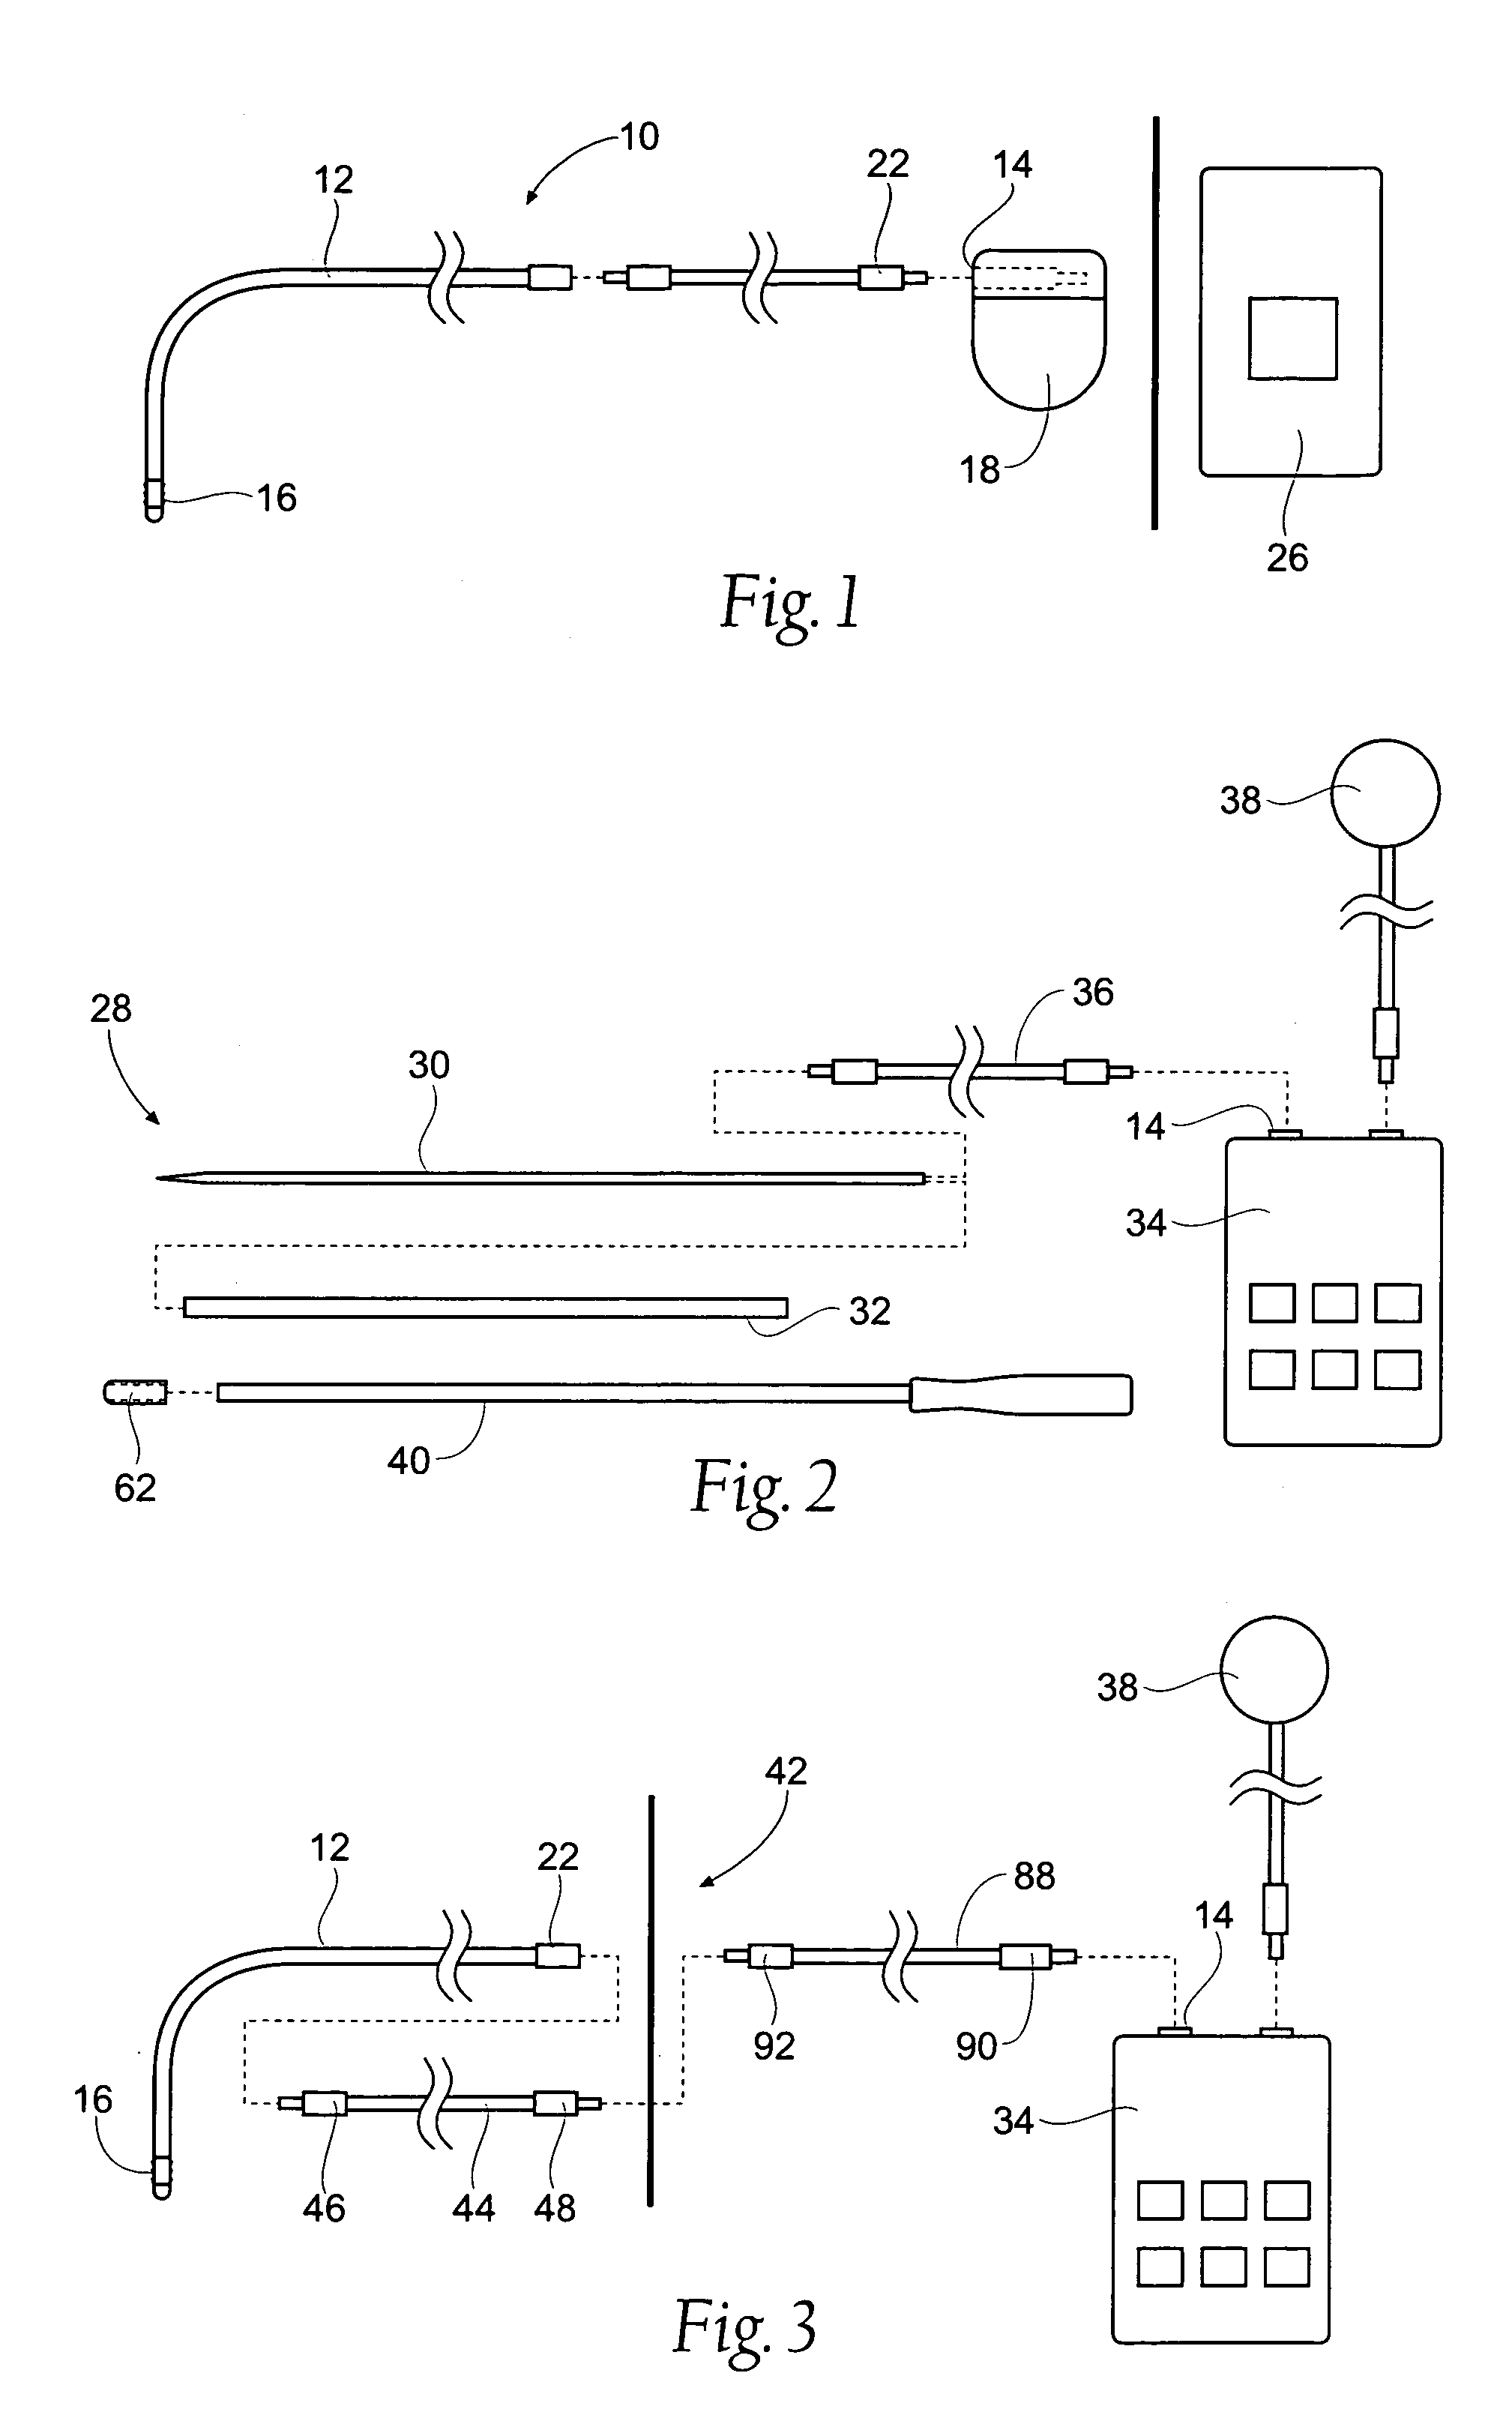 Method for affecting urinary function with electrode implantation in adipose tissue